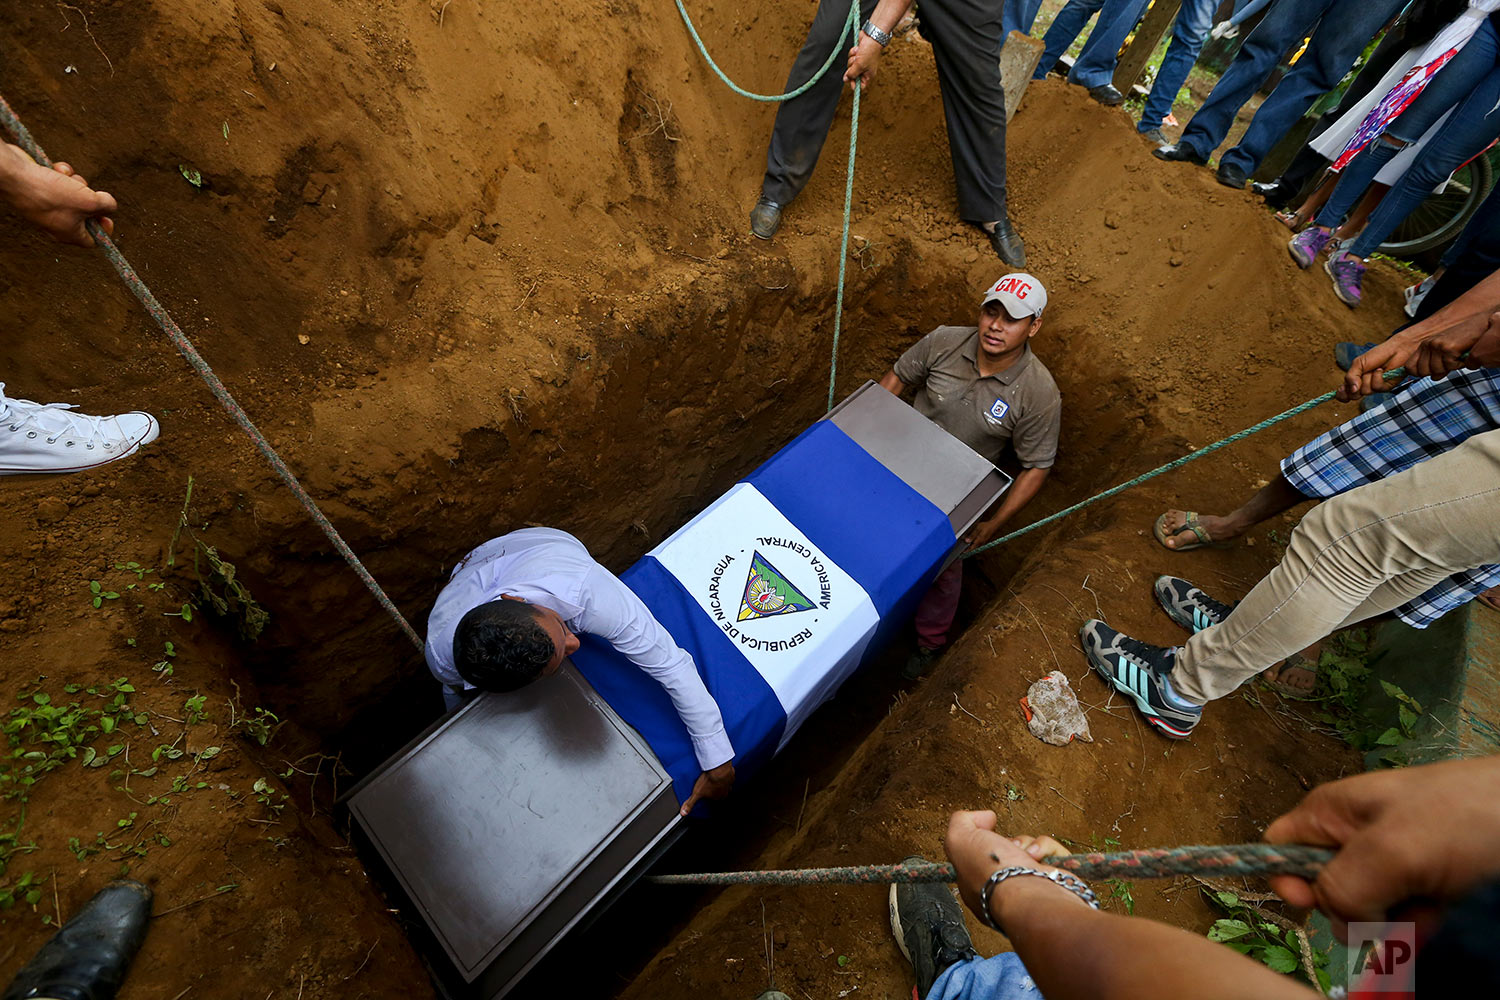  In this May 25, 2018 photo, people lower the coffin of Manuel de Jesus Chavez, 38, at the cemetery in Leon, Nicaragua. Chavez, 38, died during clashes with police as anti-government protesters blocked the Panamerican Highway. (AP Photo/Esteban Felix